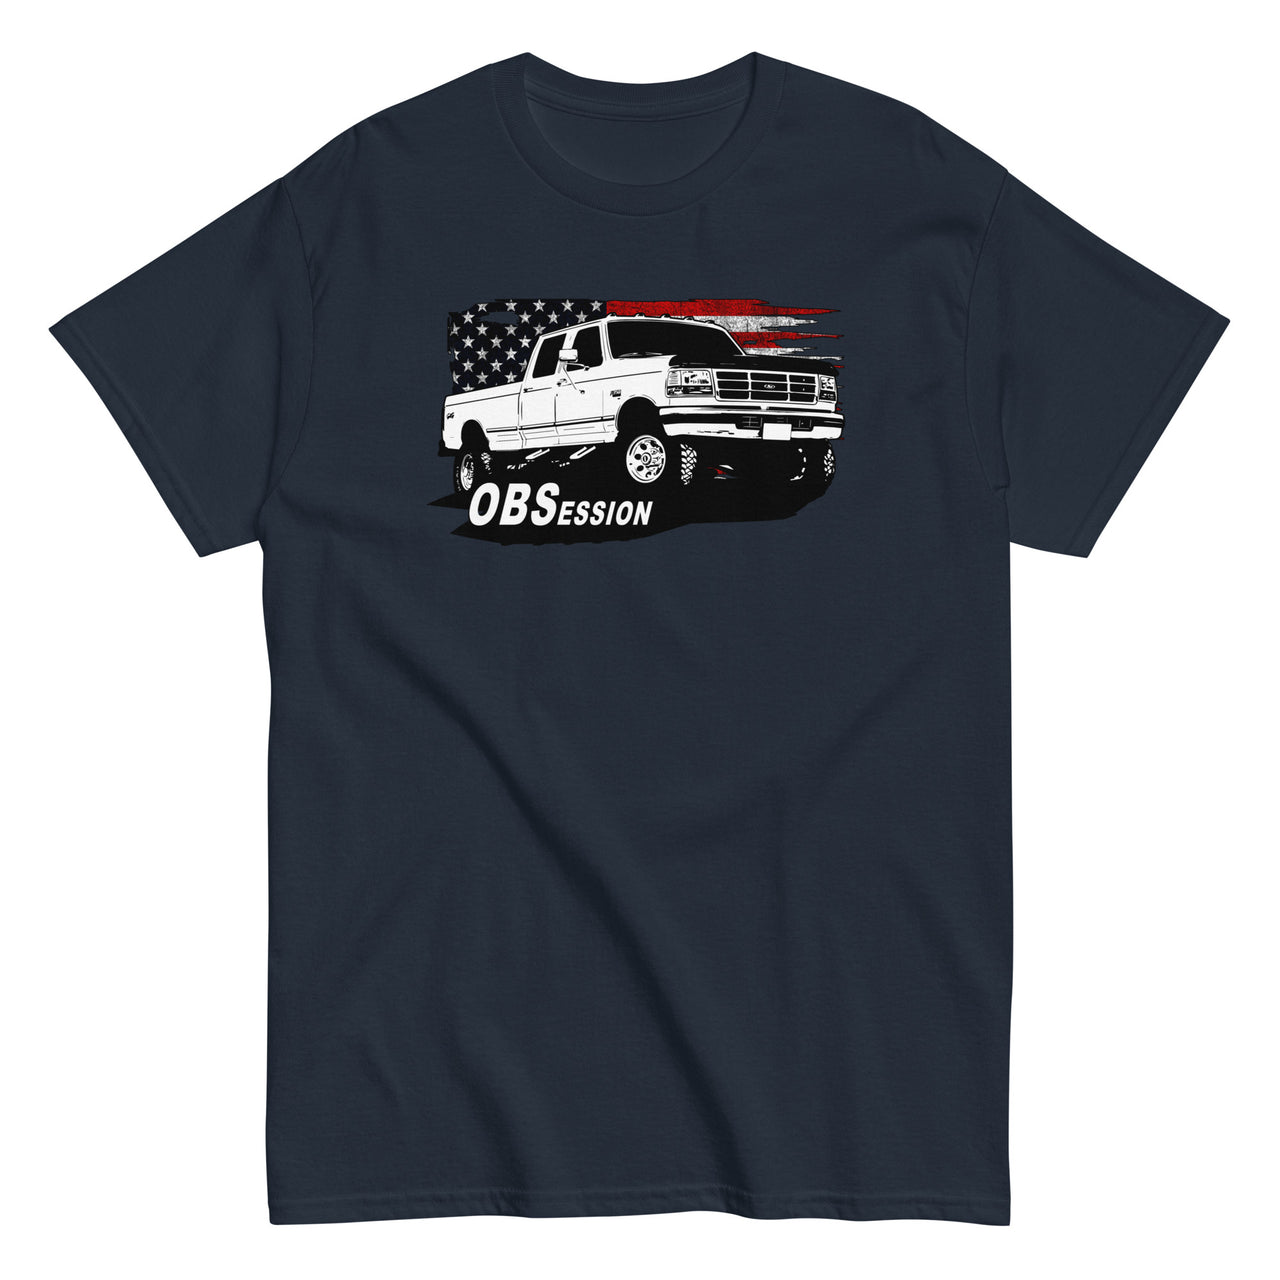 OBS Crew Cab Truck American Flag T-Shirt in navy